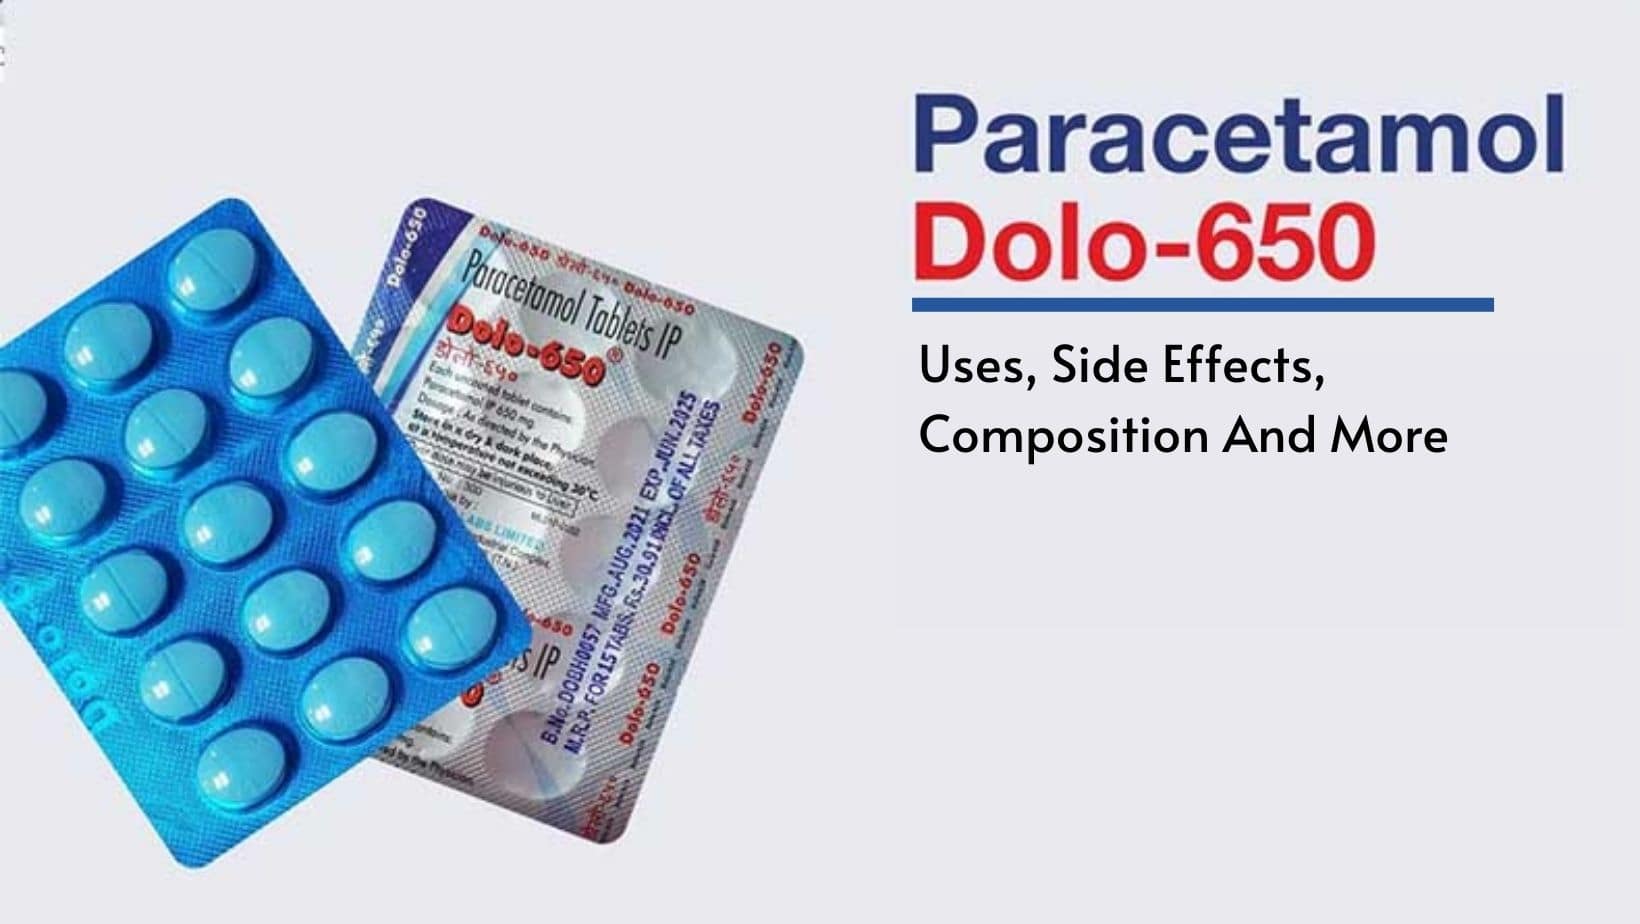 Paracetamol Dolo 650 Tablet: Uses, Side Effects, Composition And More